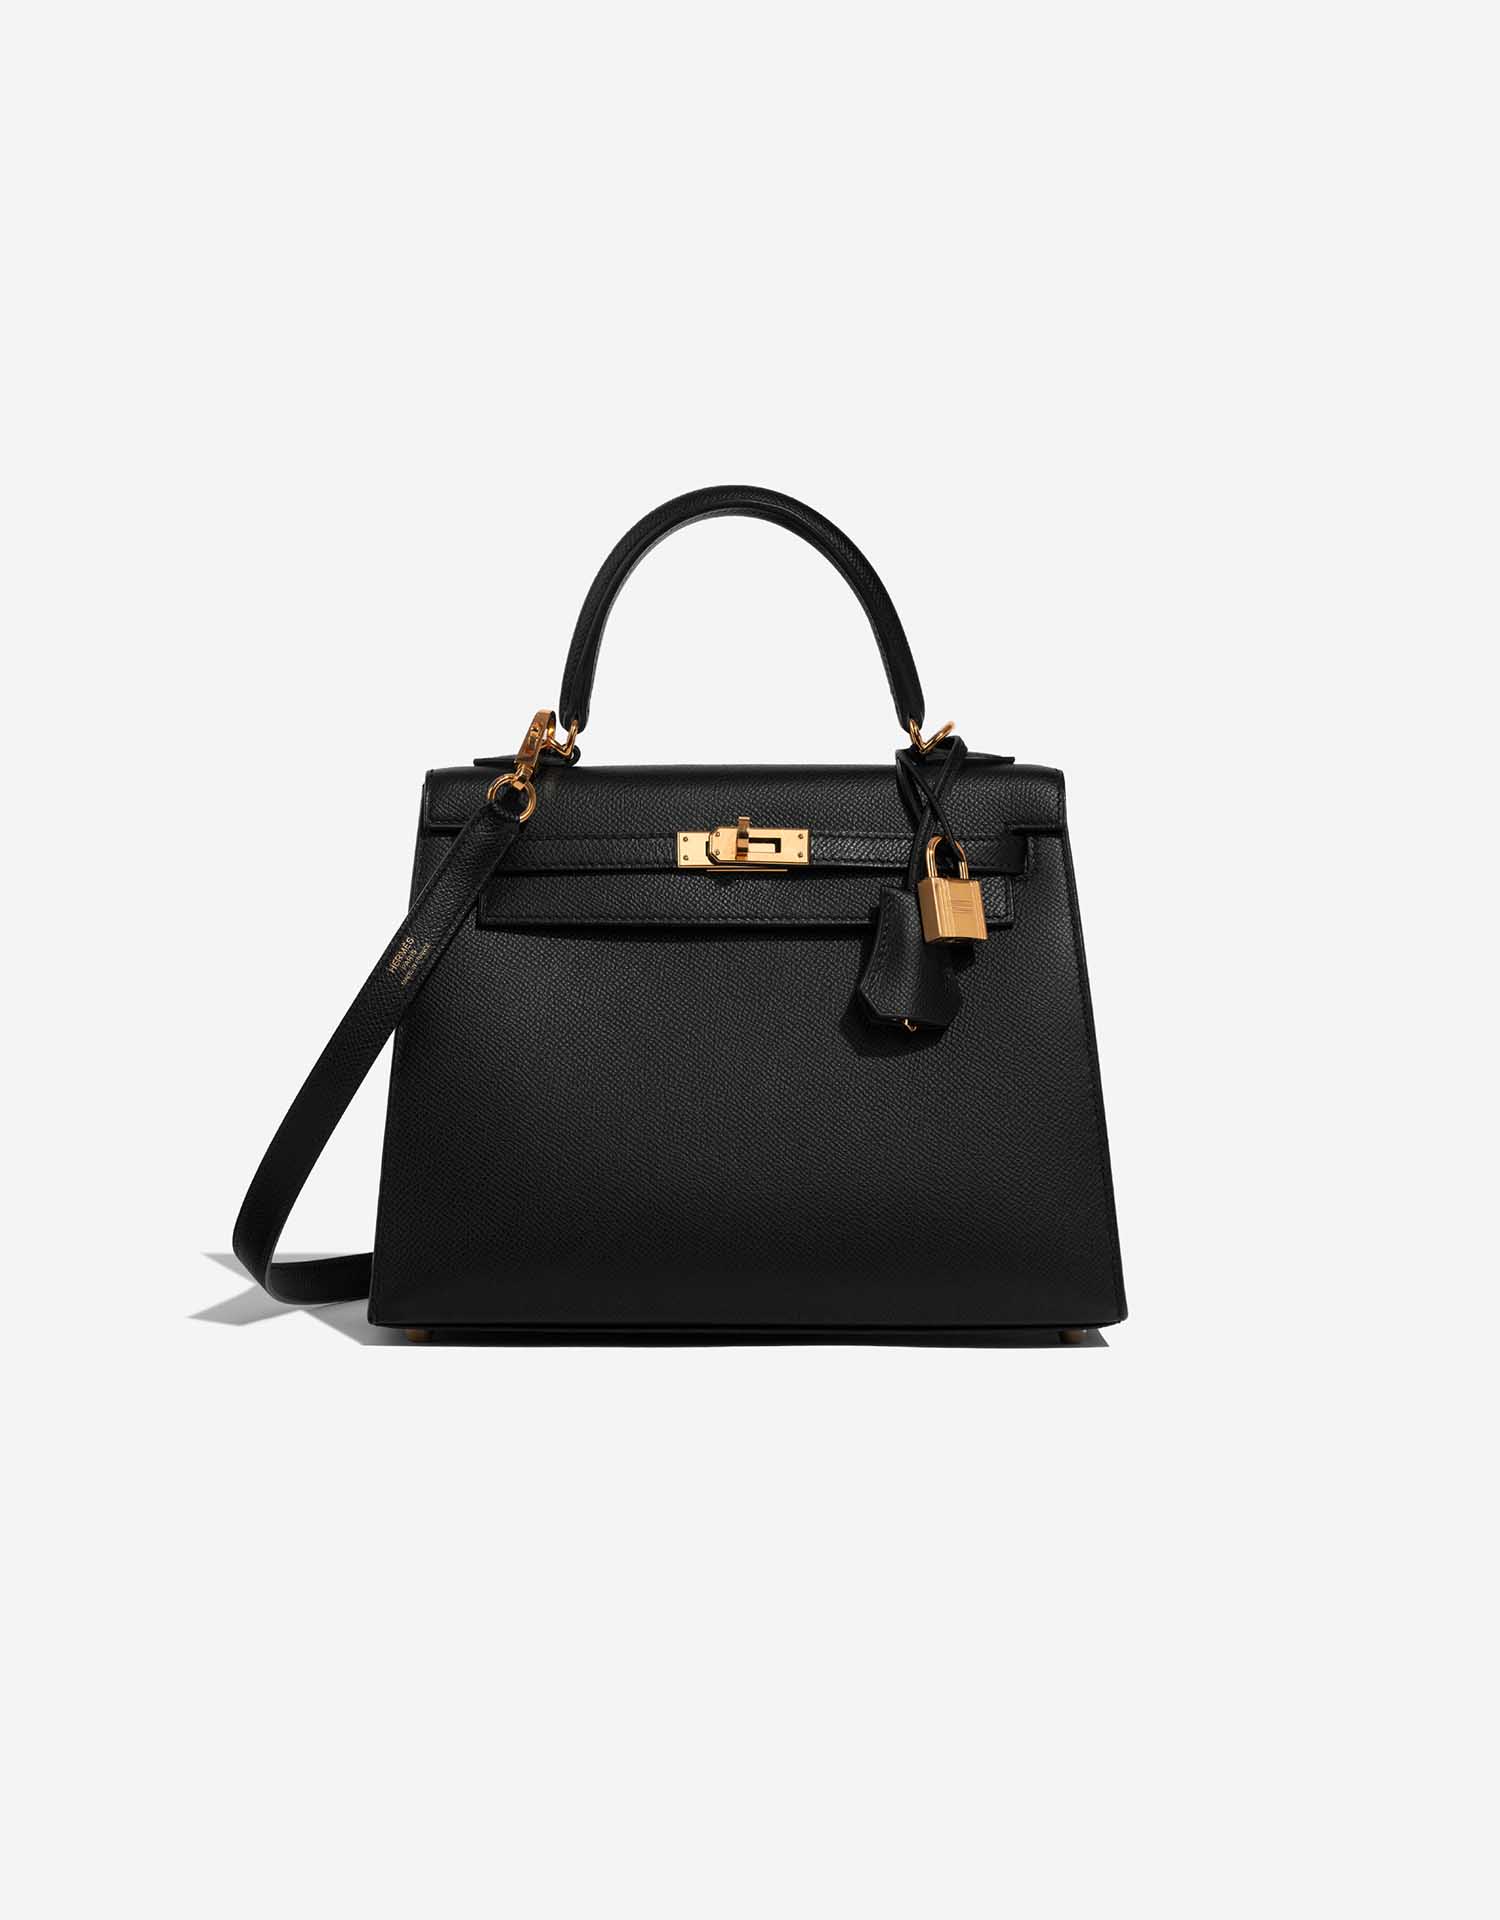 Hermes Kelly 25 Black Epsom Sellier with gold plated hardware